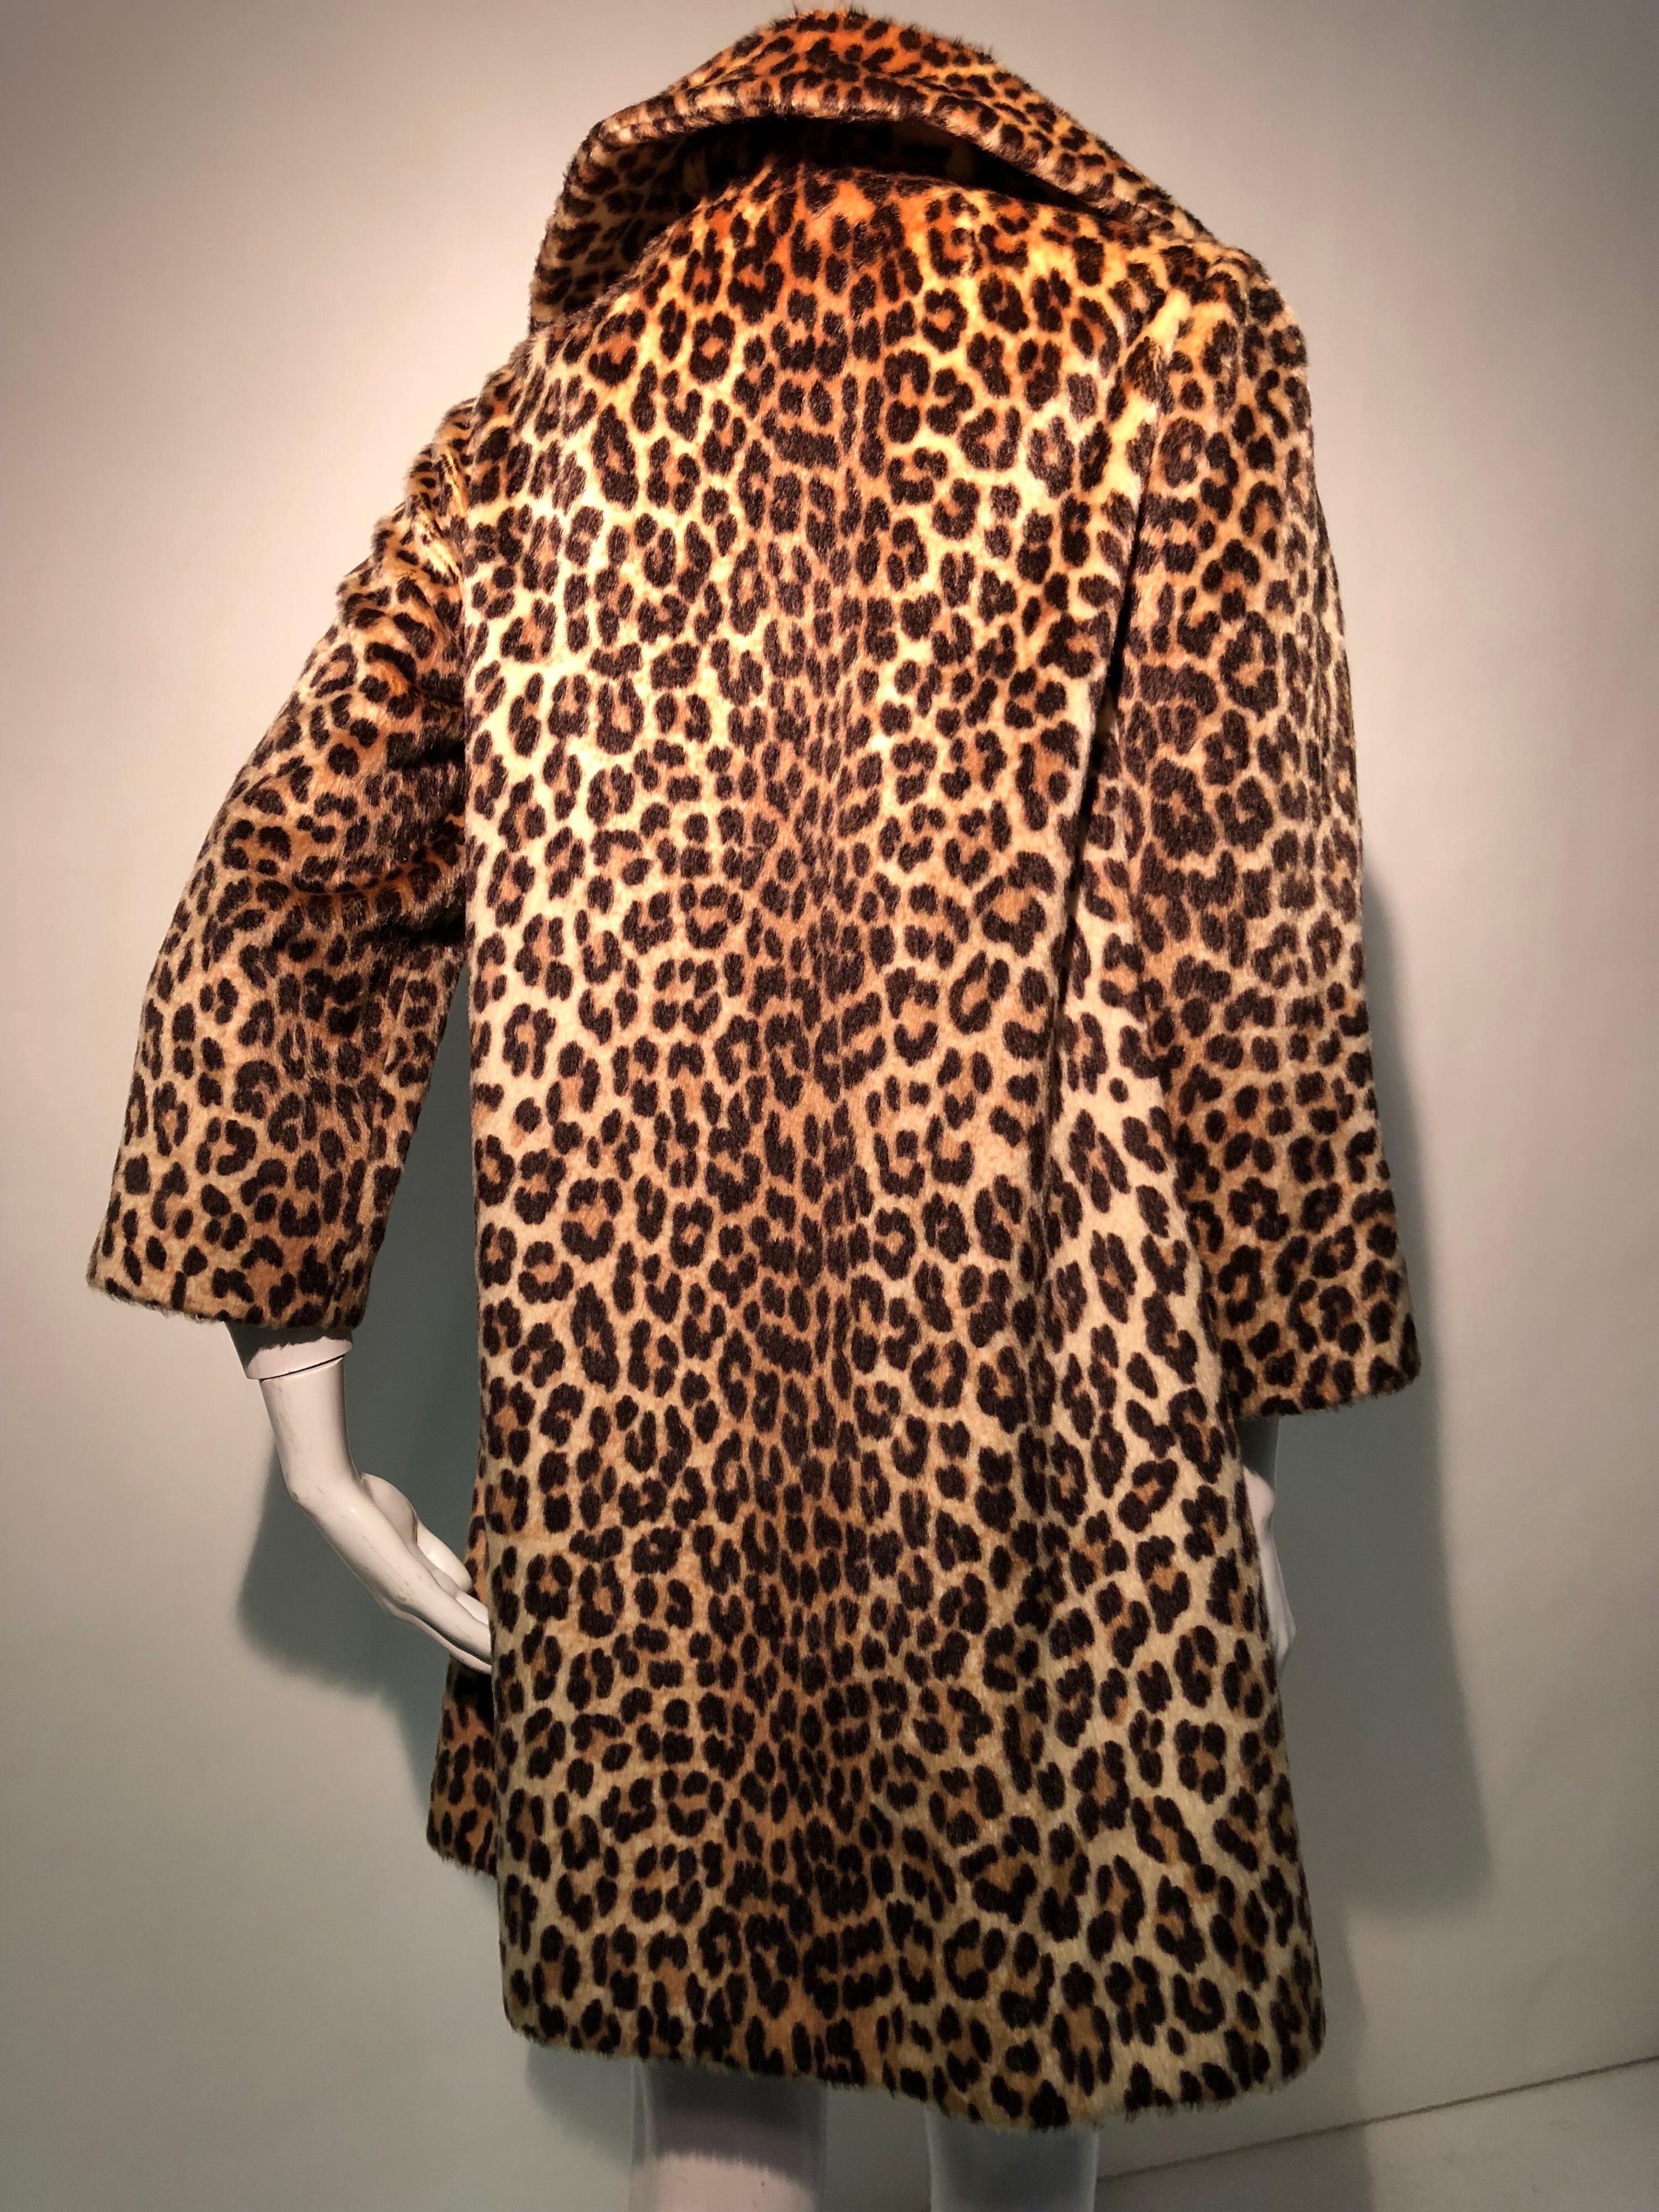 1960s Faux Leopard Fur Trench Coat W/ Original Belt By Somali  In Excellent Condition For Sale In Gresham, OR